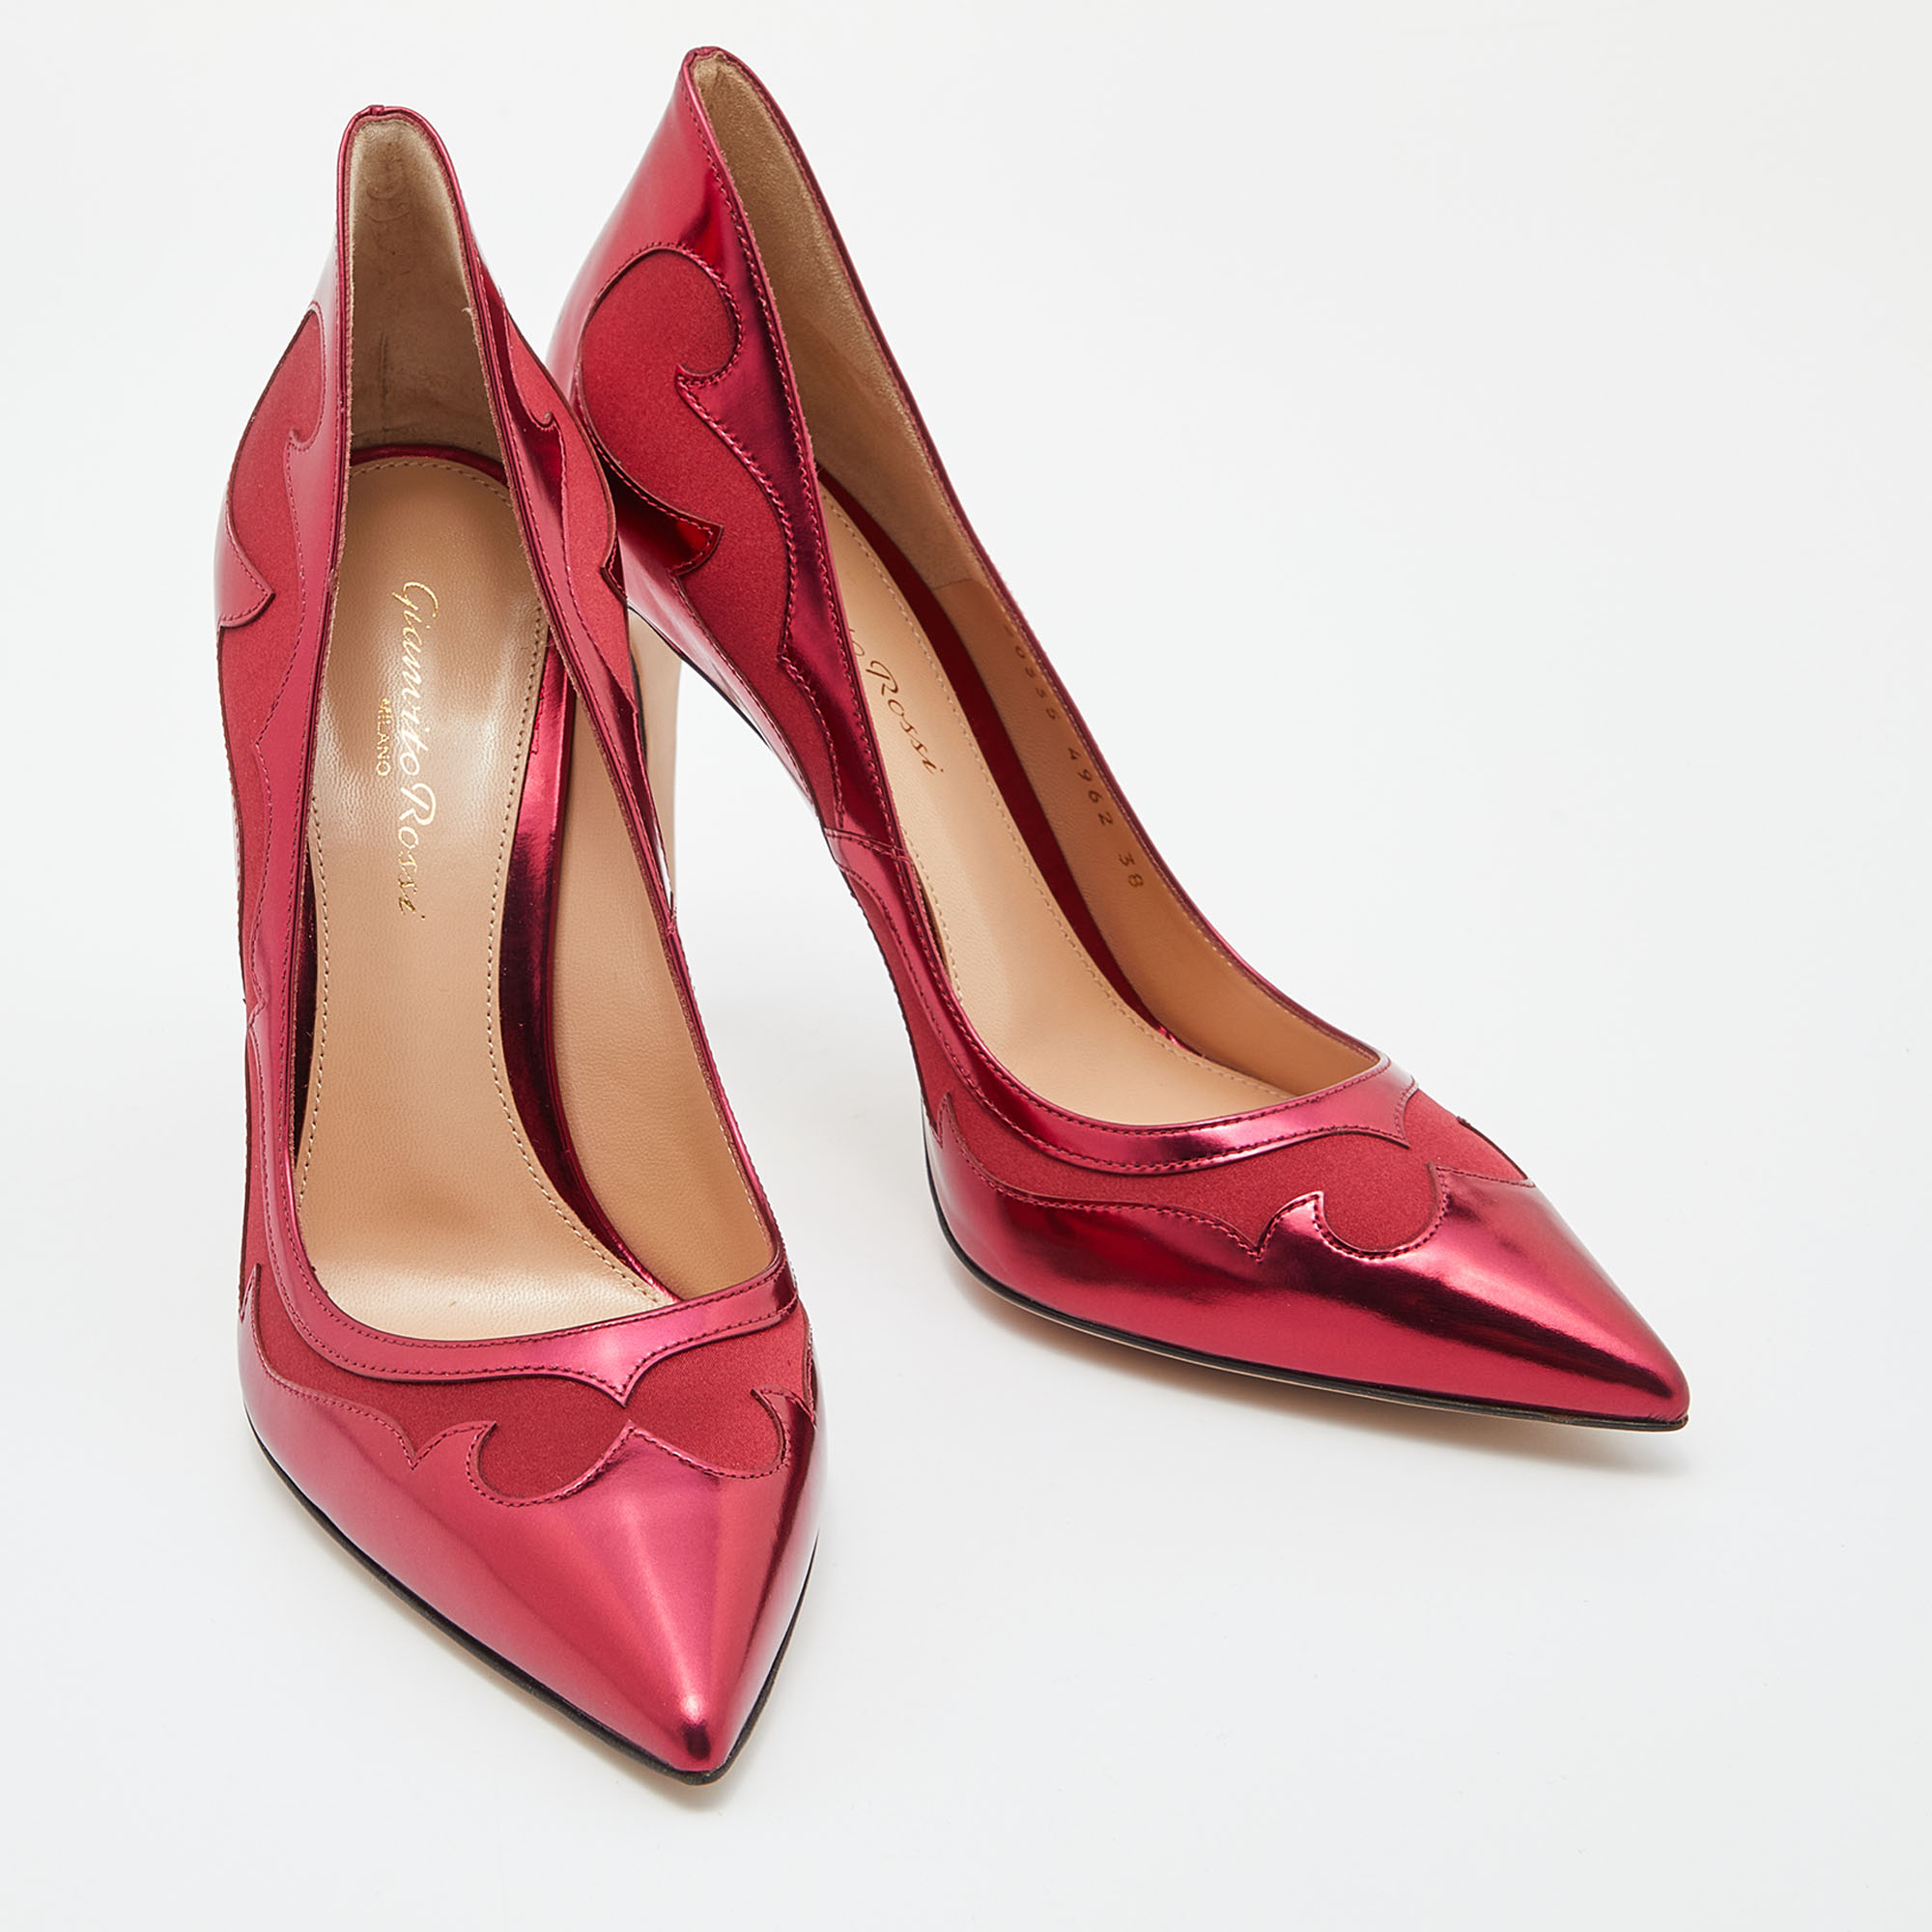 Gianvito Rossi Burgundy Laser Cut Leather And Satin Pointed Toe Pumps Size 38